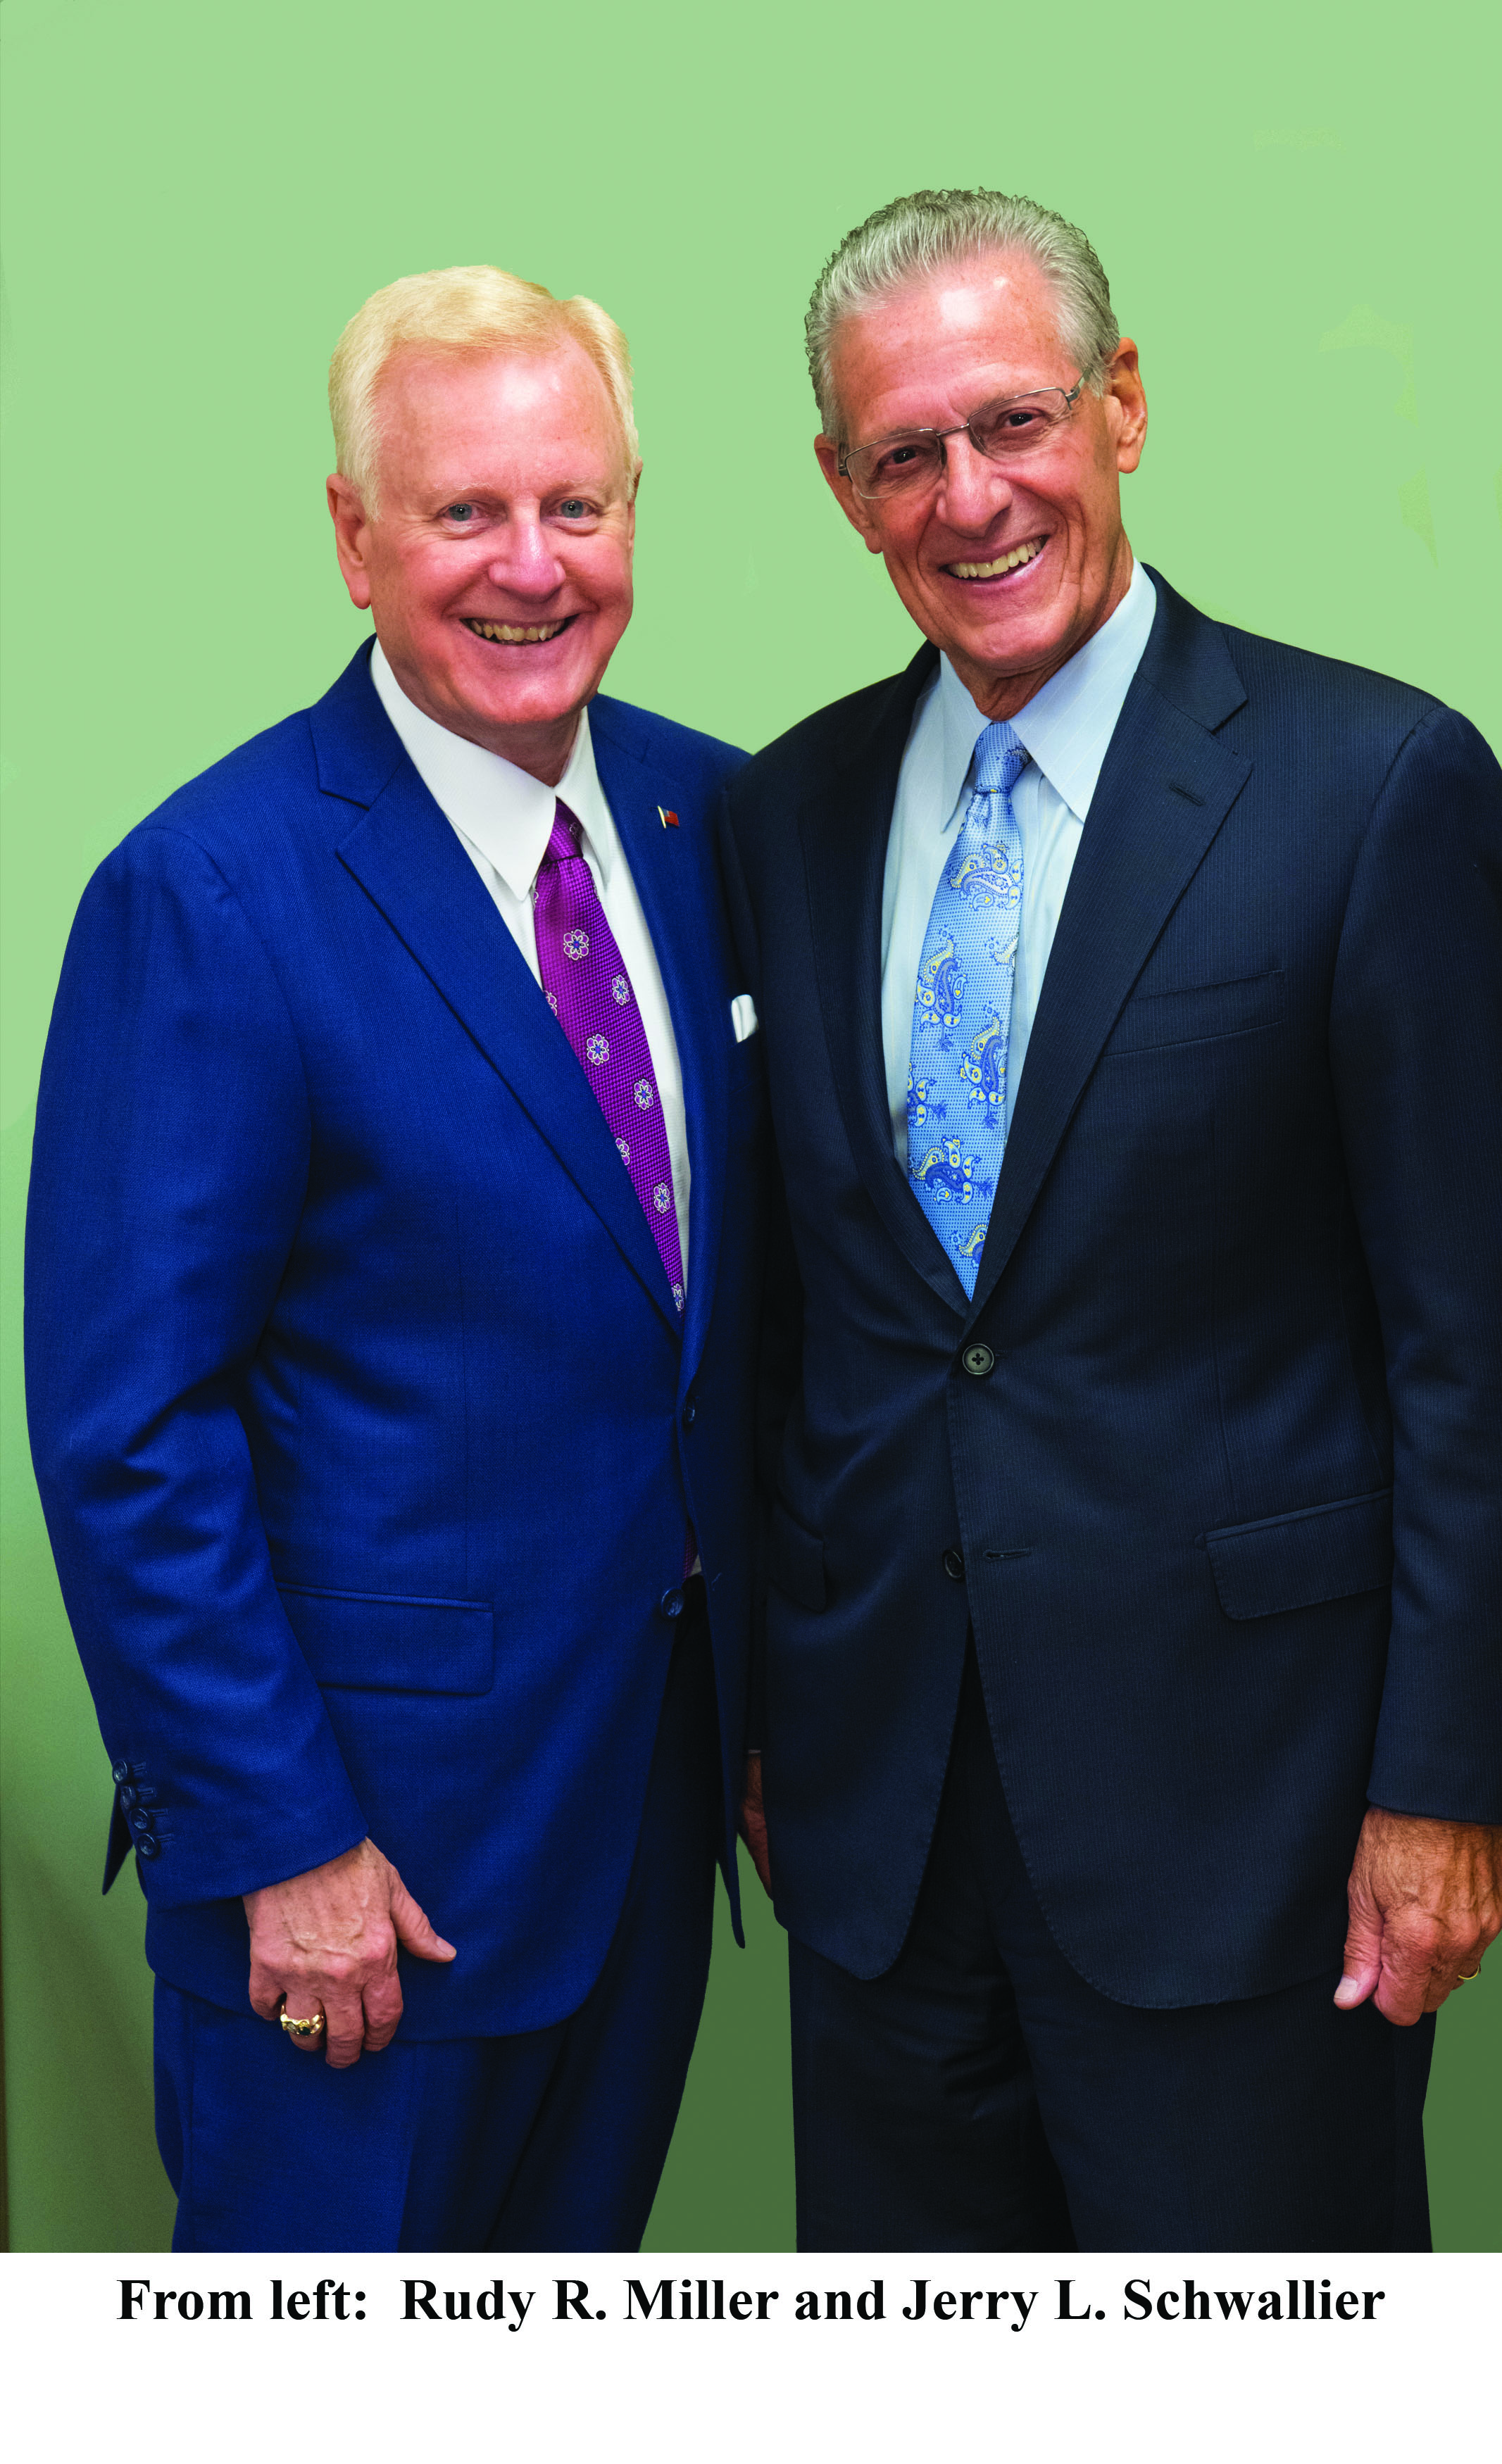 Rudy R. Miller and Jerry L. Schwallier